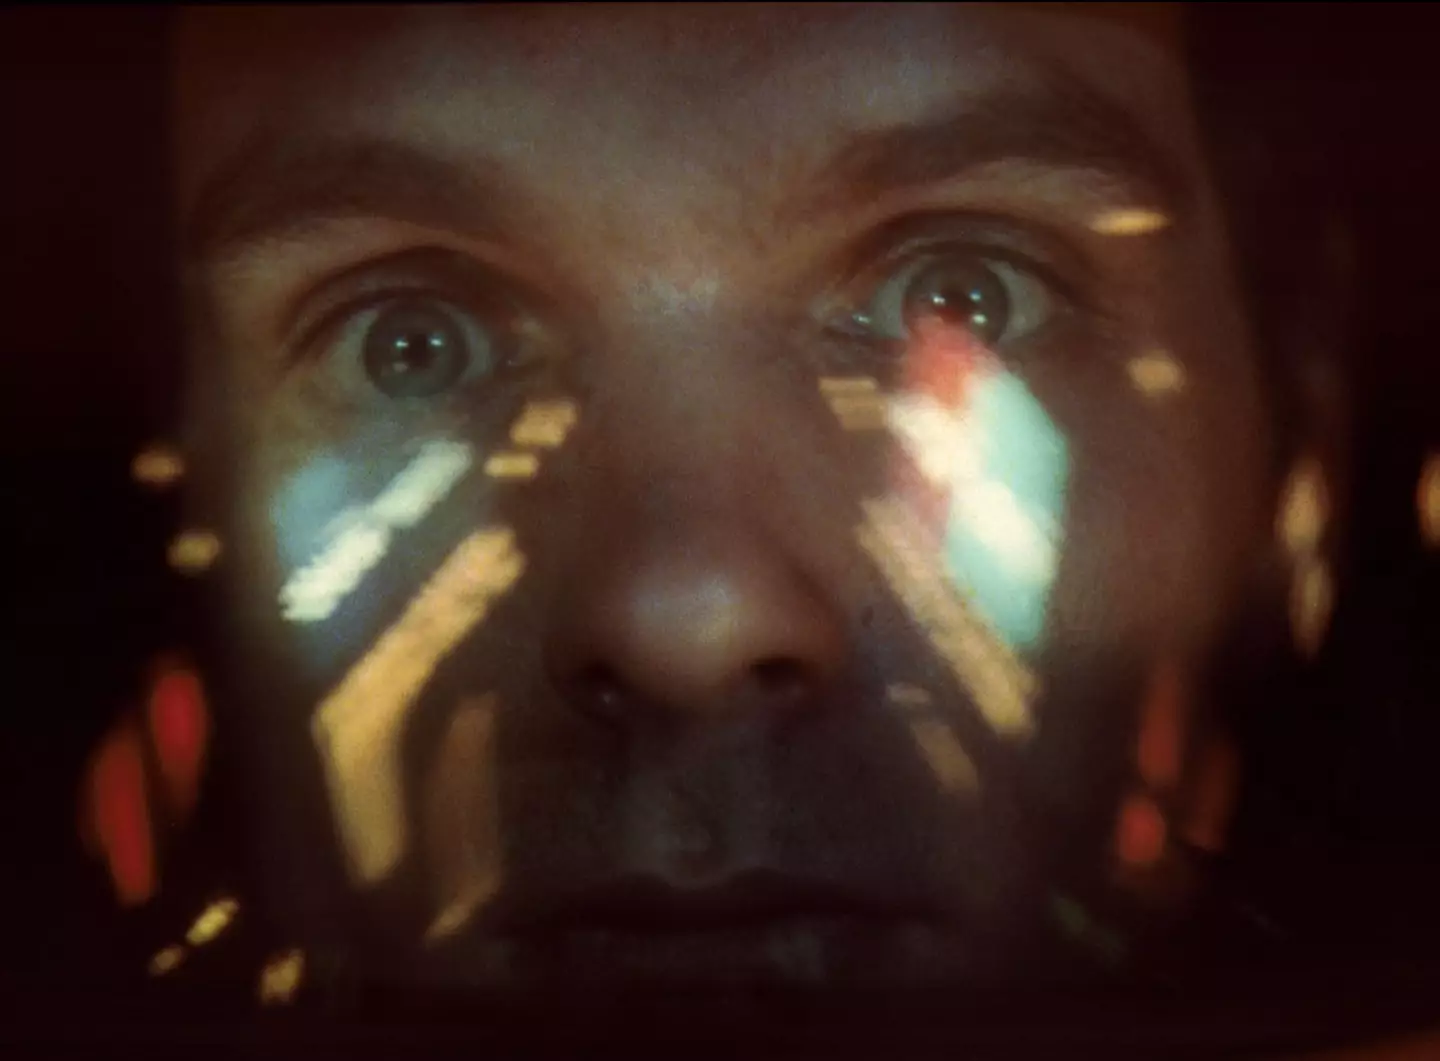 Stanley Kubrick's 2001: A Space Odyssey is a sci-fi classic.